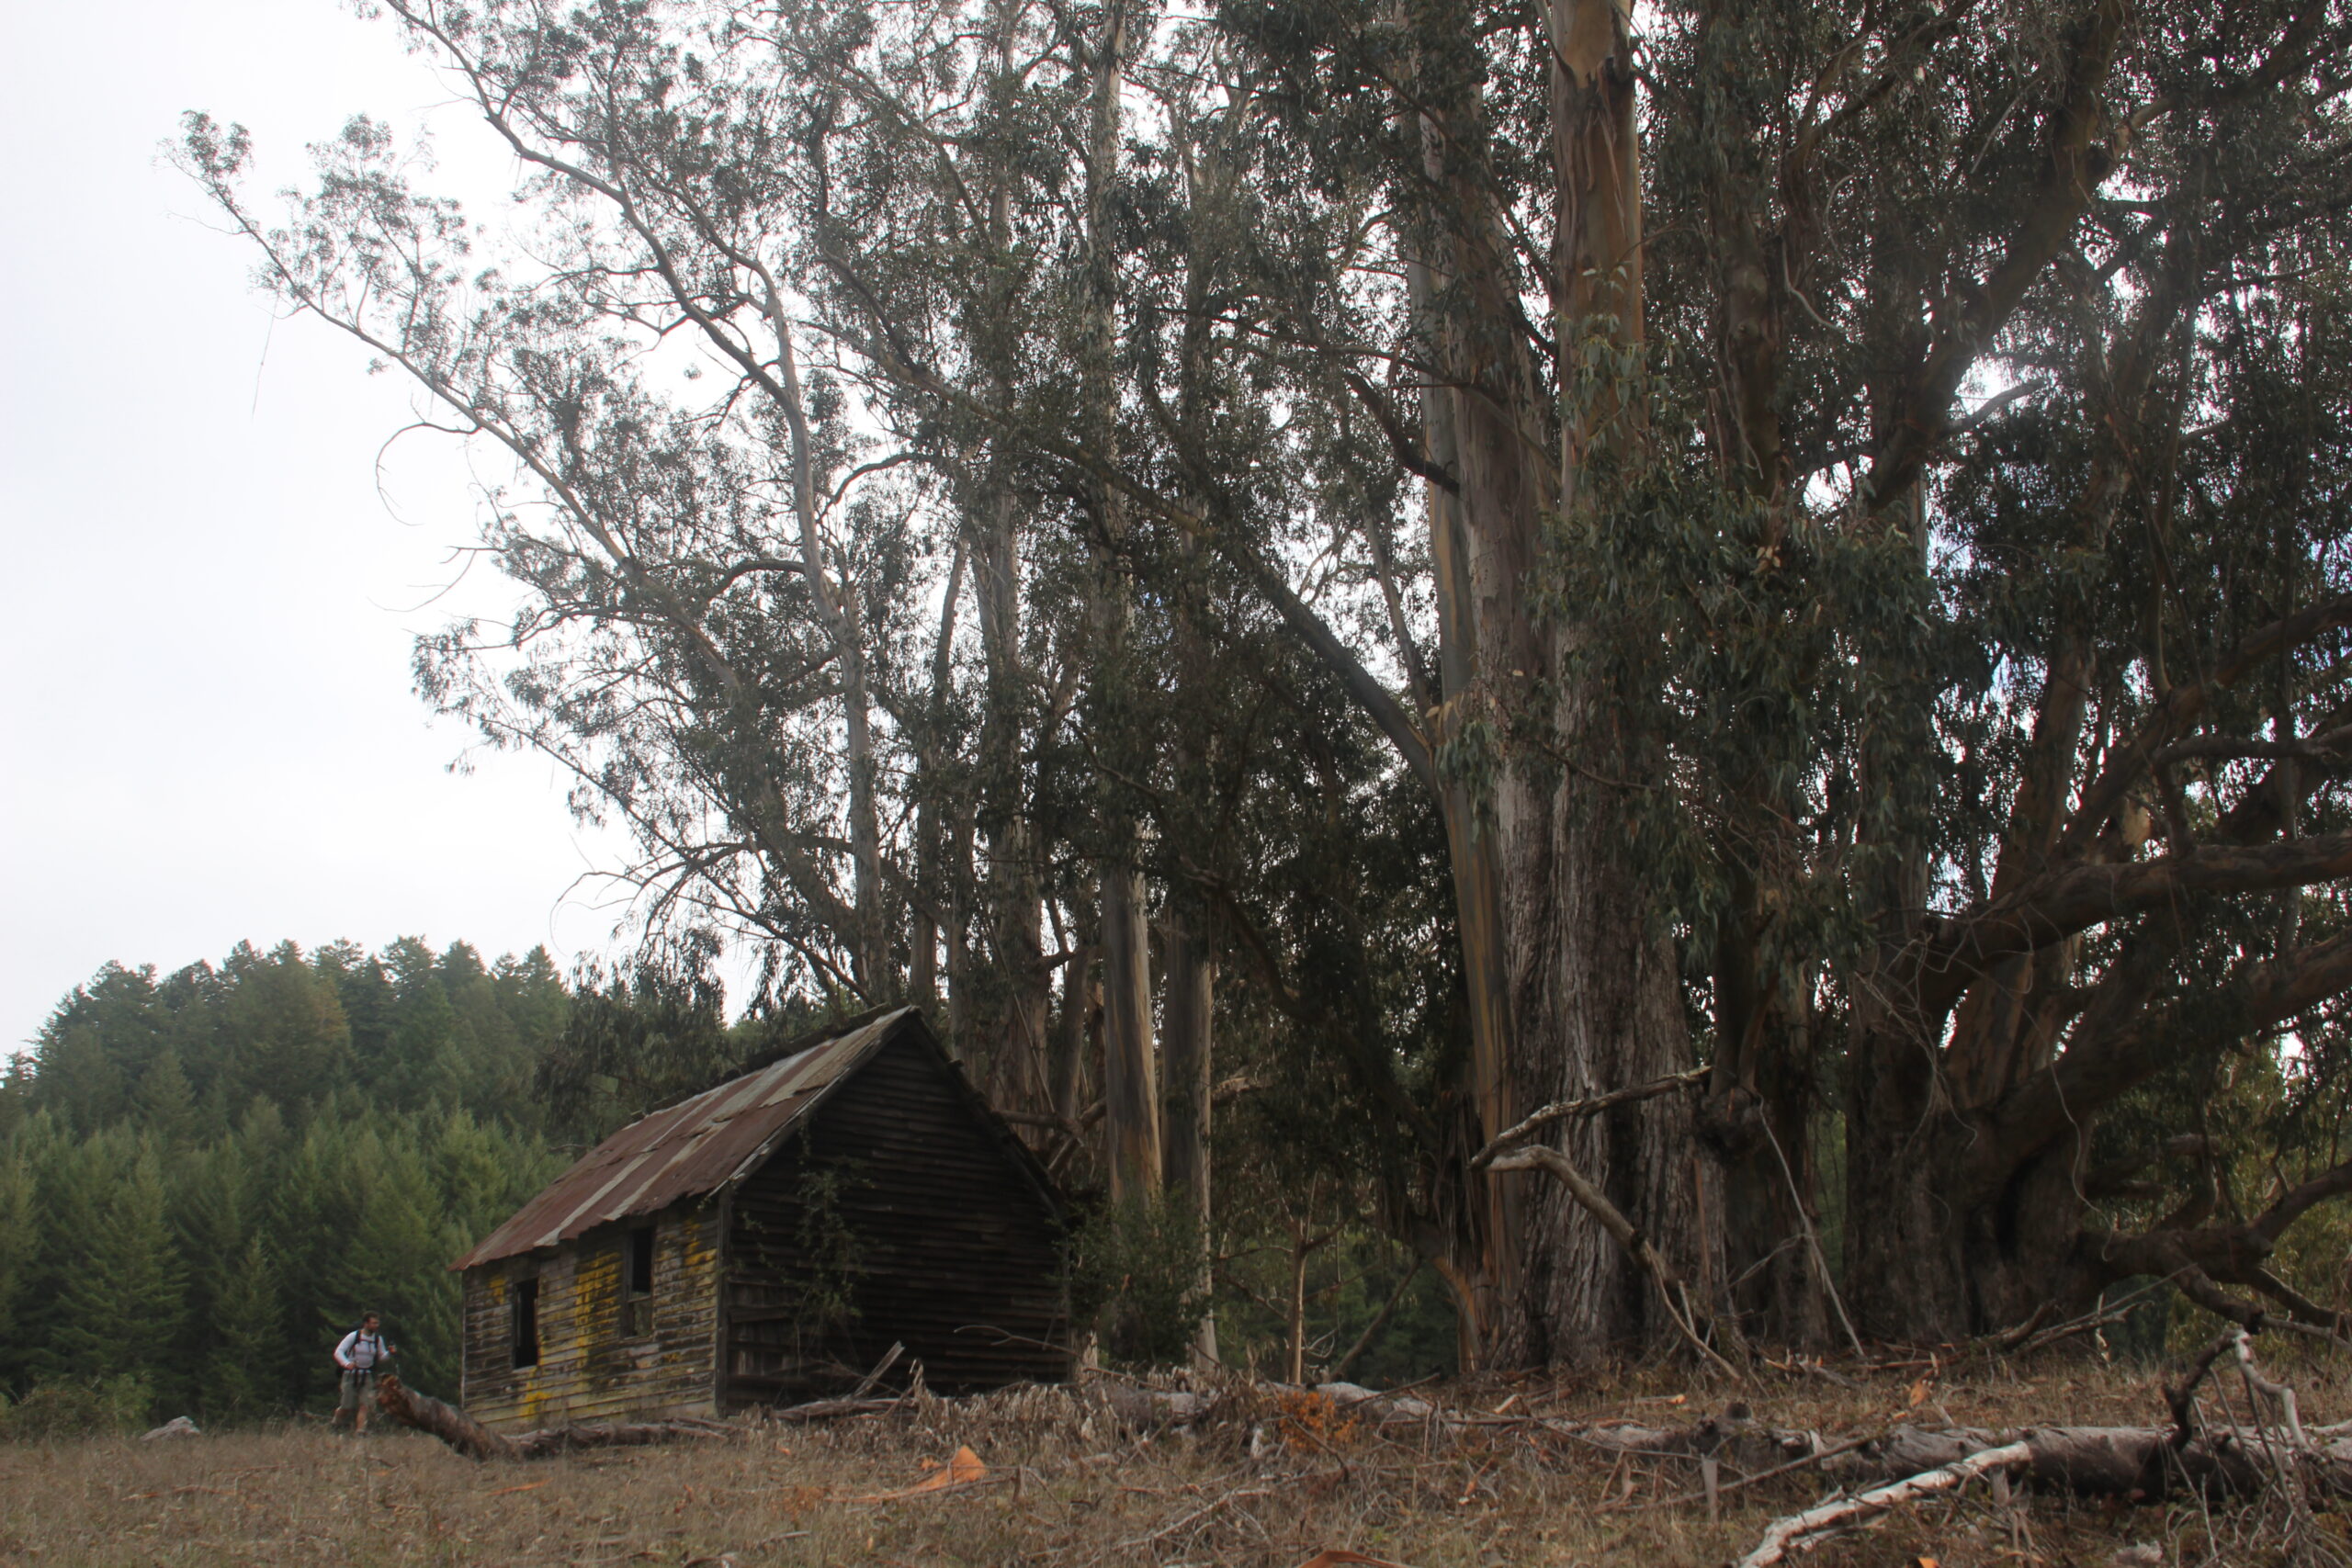 The remnants of an old dairy farm can be seen in Pescadero Creek Park.